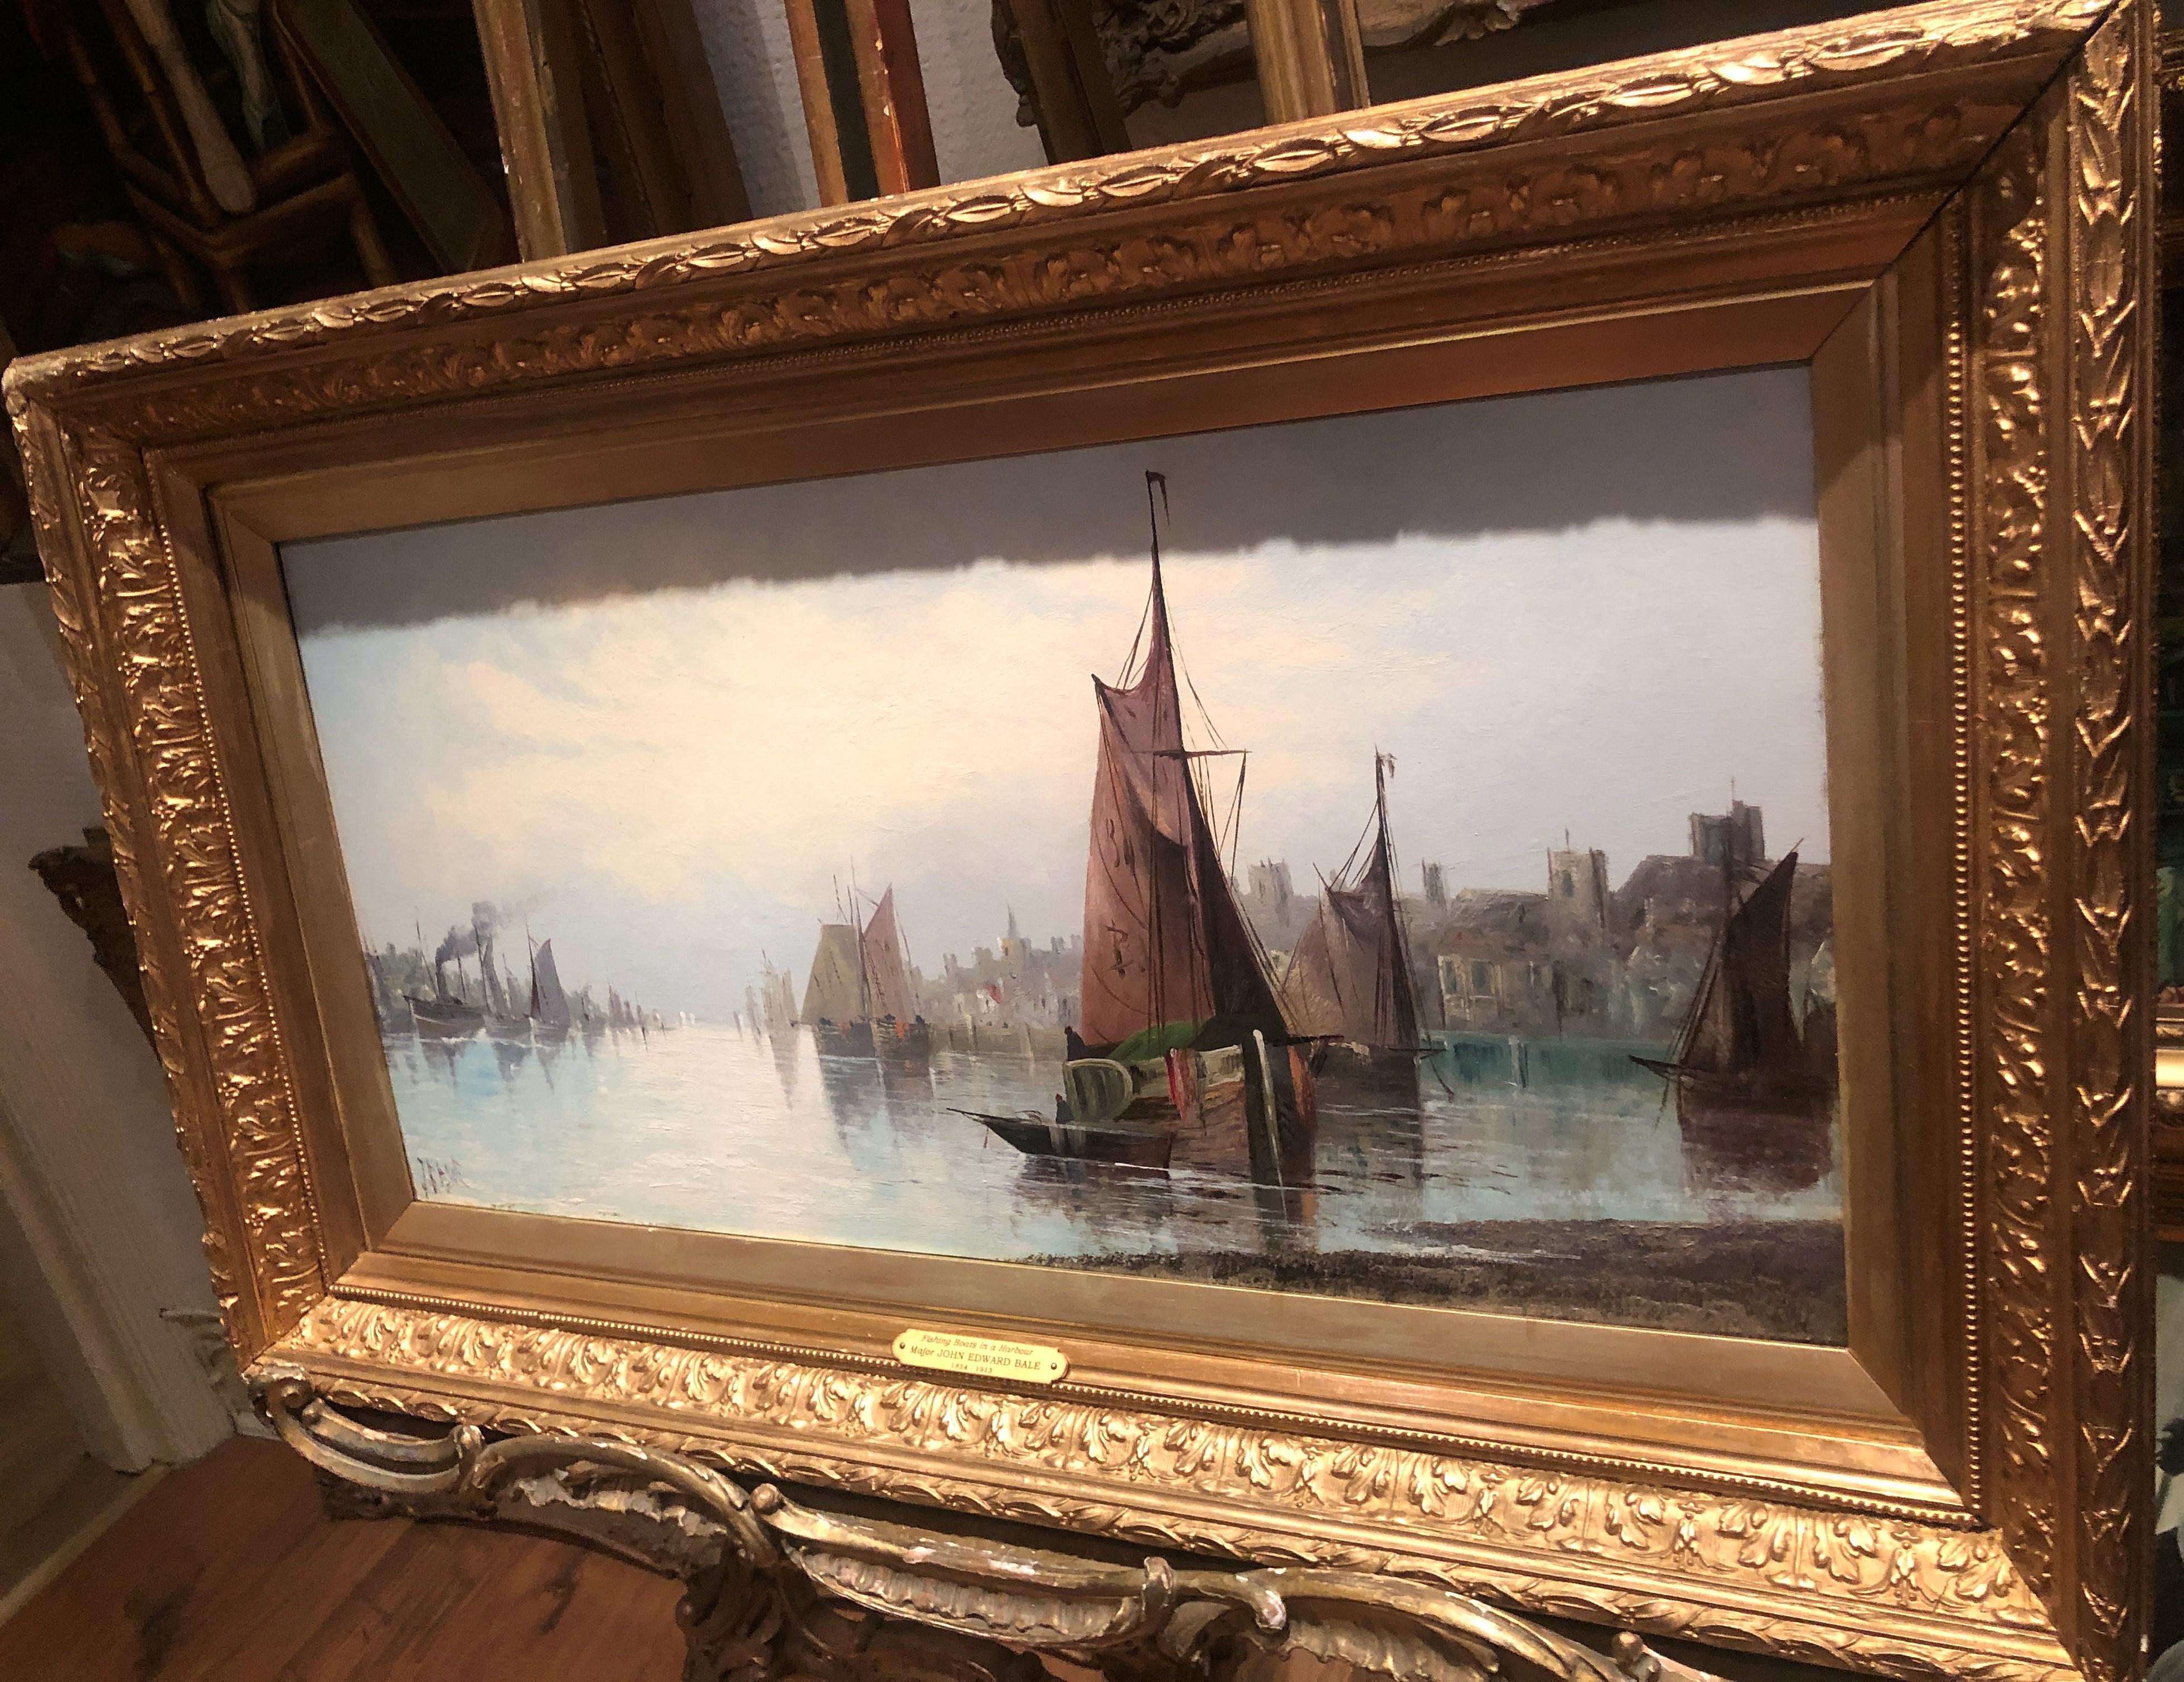 OIL PAINTING SIGNED OLD FINE MASTER PAINTER 19th Century BRITISH SCHOOL

Fine Original Antique 19th Century British OLD MASTER

OIL PAINTING

GOLD GILT FRAME

NEW COLLECTION Of RARE PIECES OF ENGLISH HISTORY
 
By Major John Edward Bale Similar 